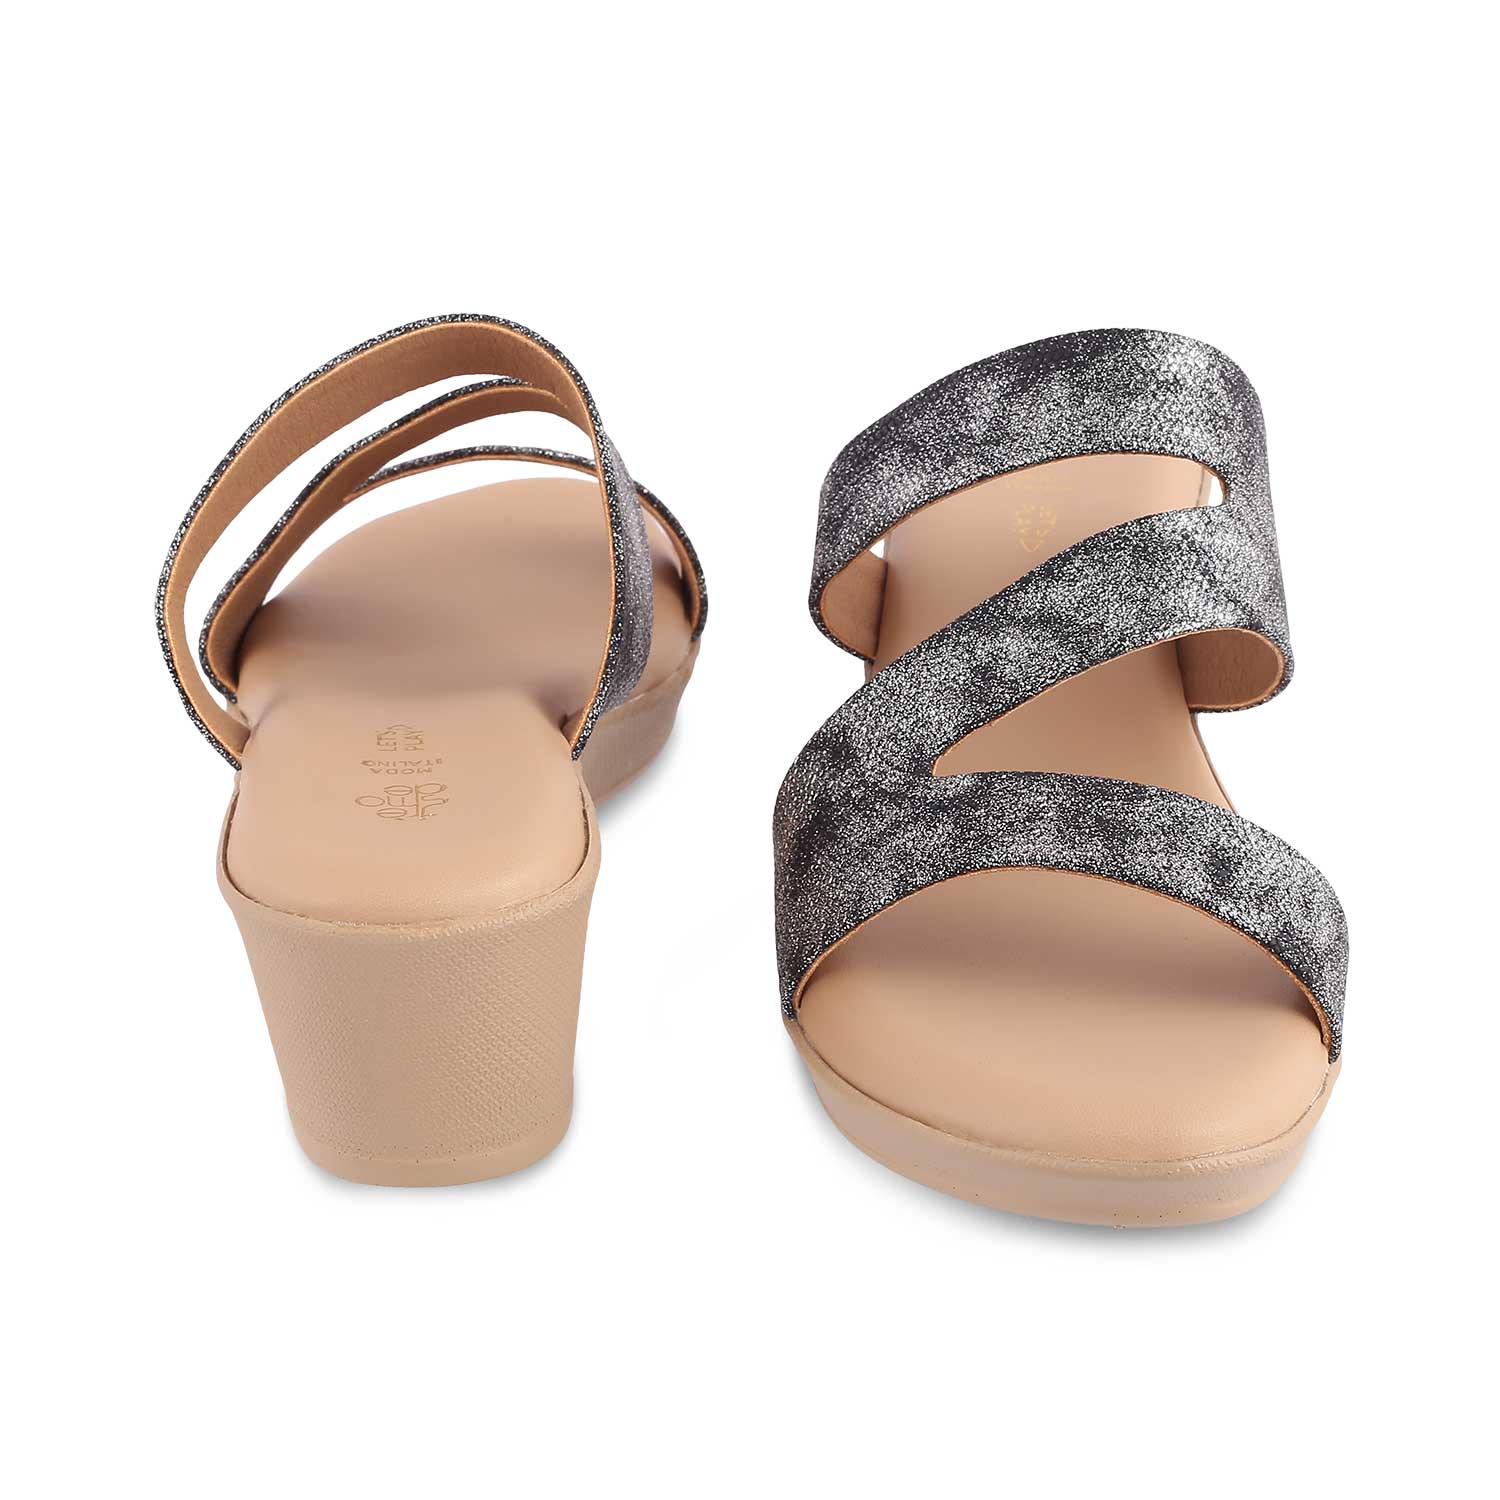 The Snike Pewter Women's Dress Wedge Sandals Tresmode